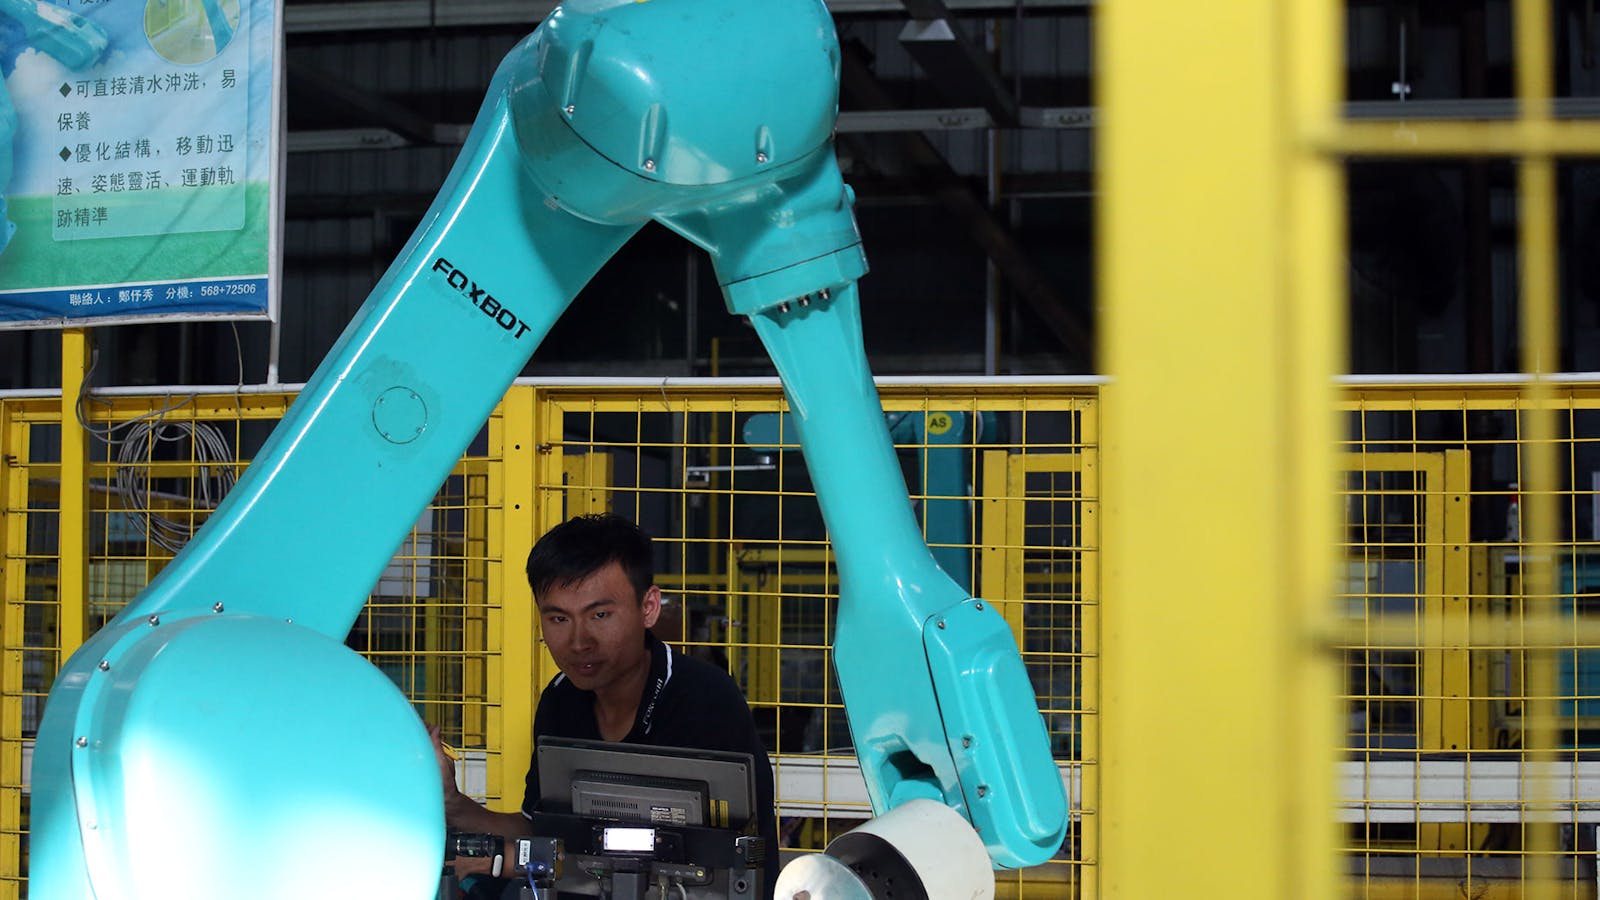 Testing for Foxconn's industrial robots "Foxbot" are performed at Foxconn factory in Longhua town, Shenzhen in 2016. Photo by Getty Images.